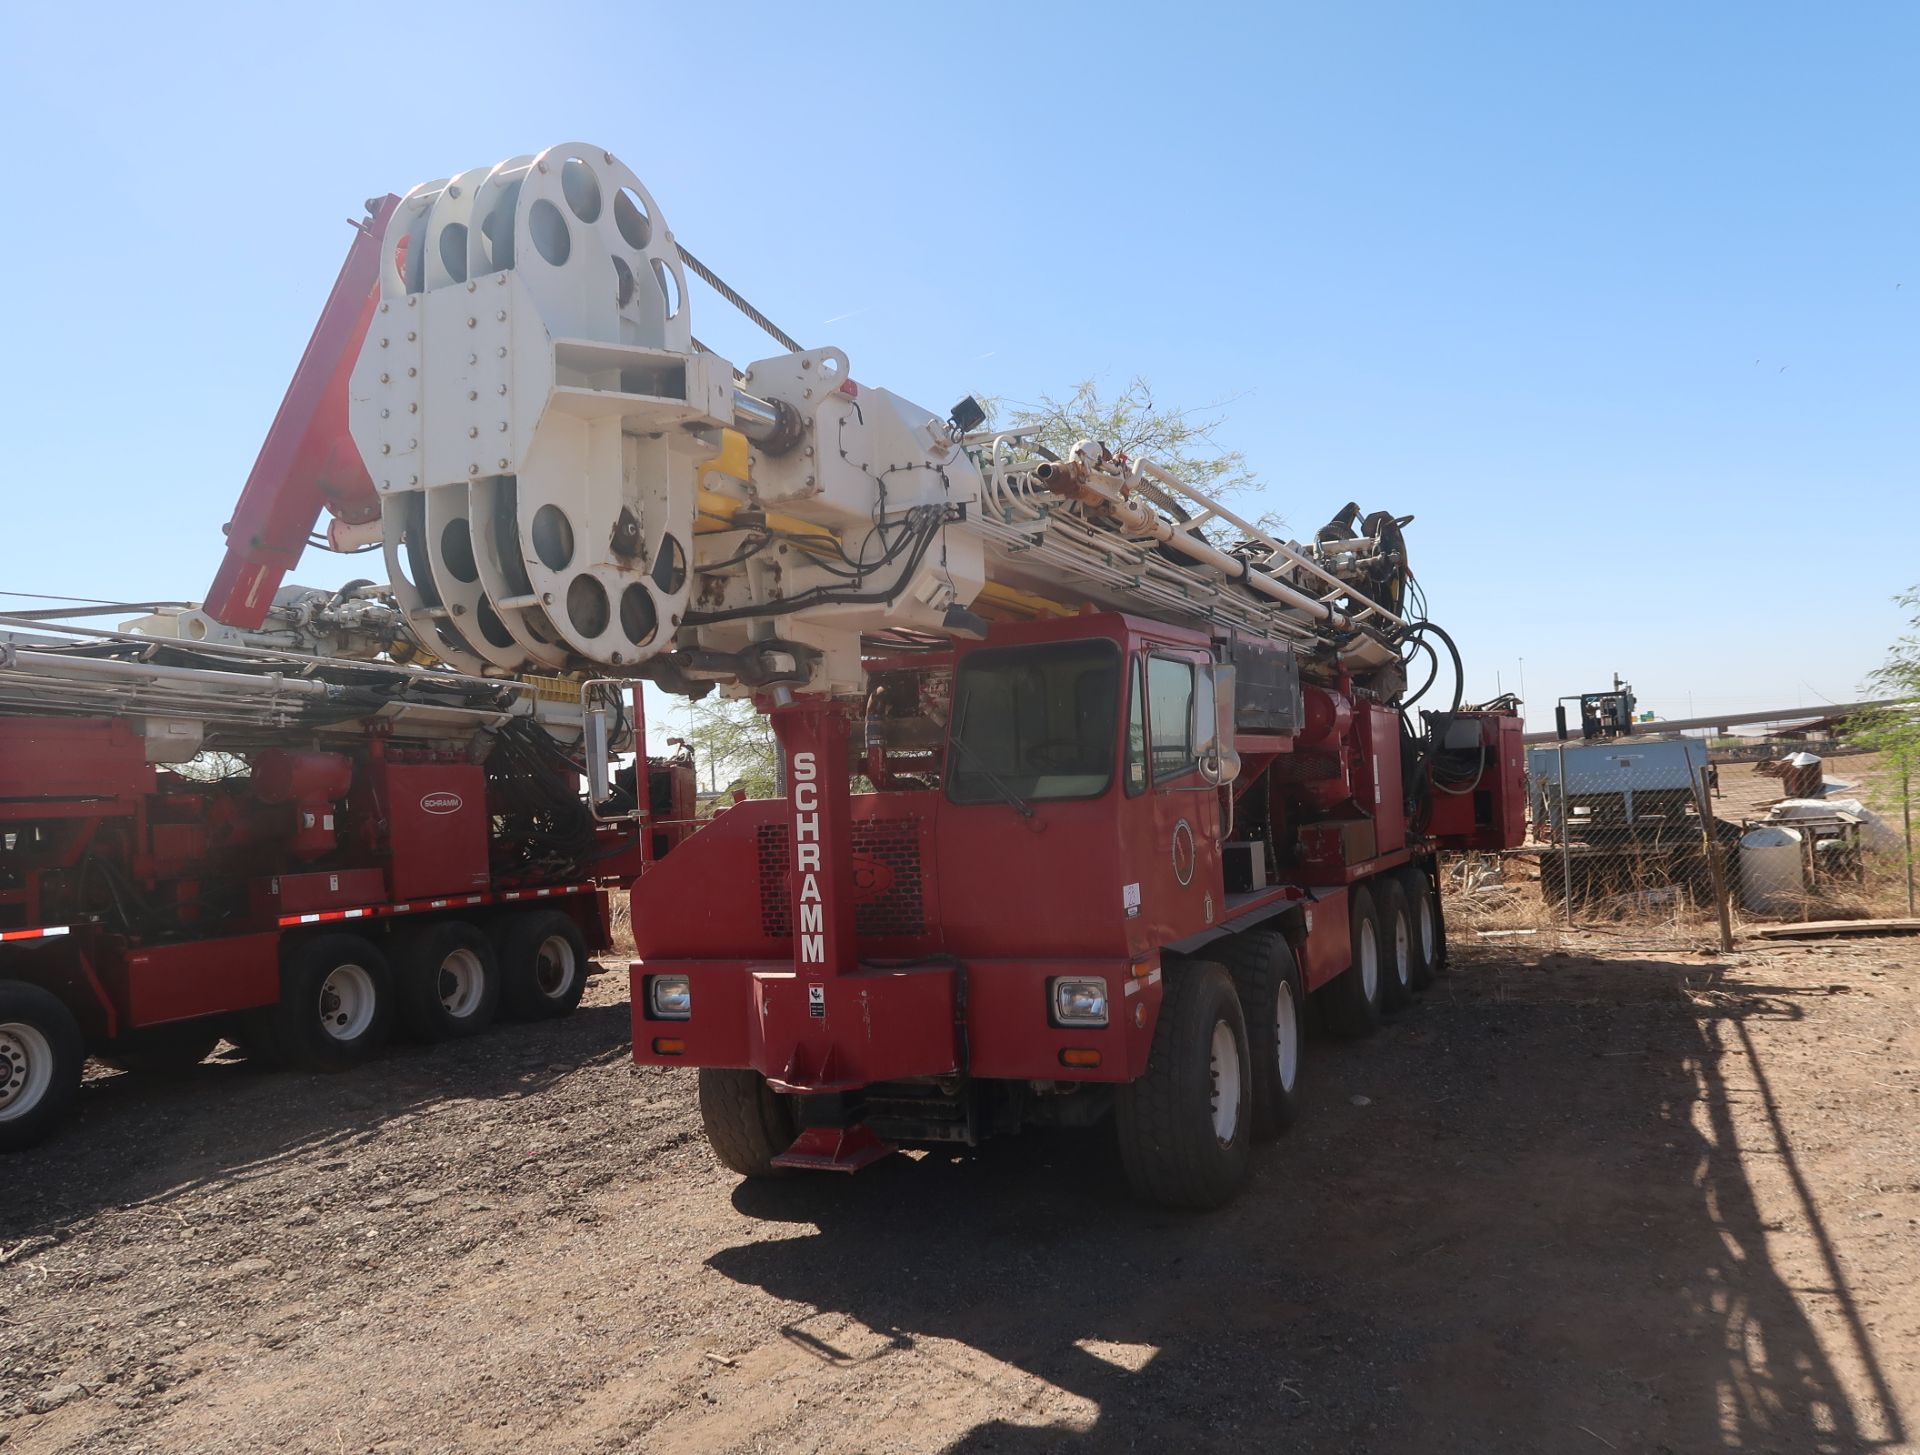 2006 SCHRAMM T-130XD DRILL RIG, SN. J130-0154 MOUNTED ON CRANE CARRIER, VIN. 1CYDGV6846T047562